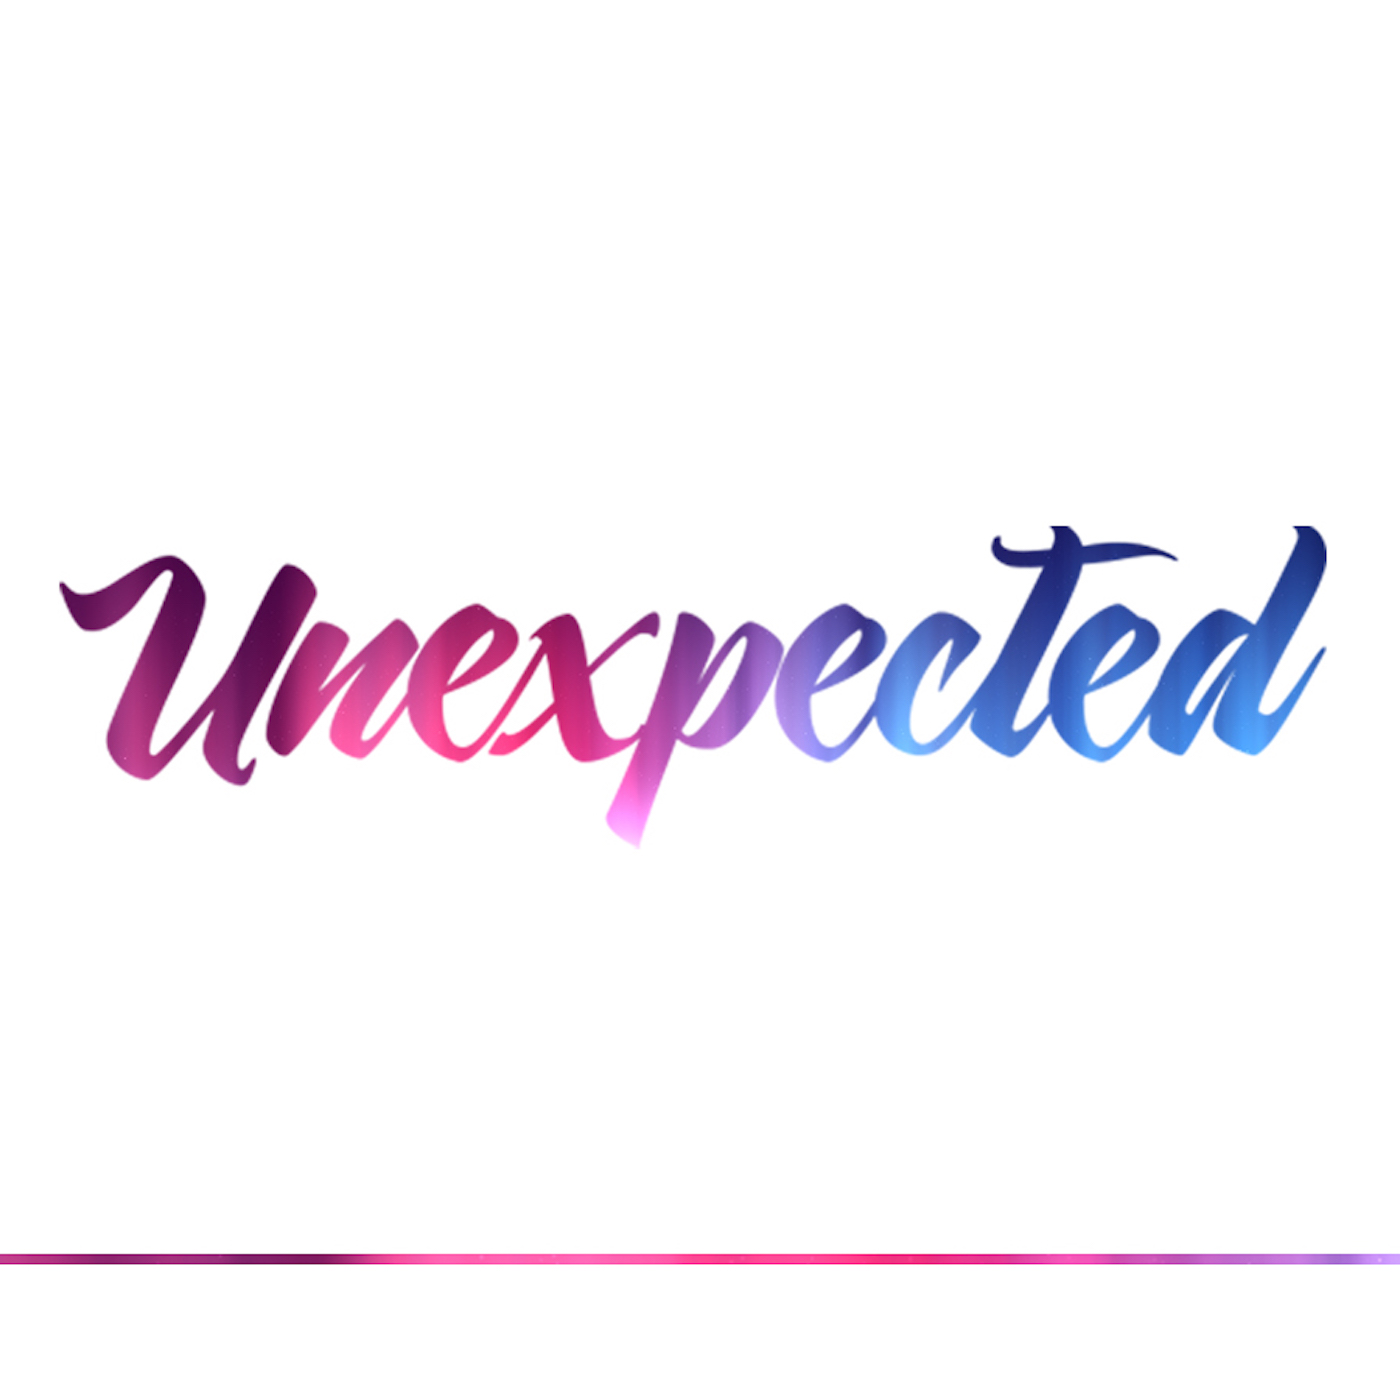 Unexpected - Week 5